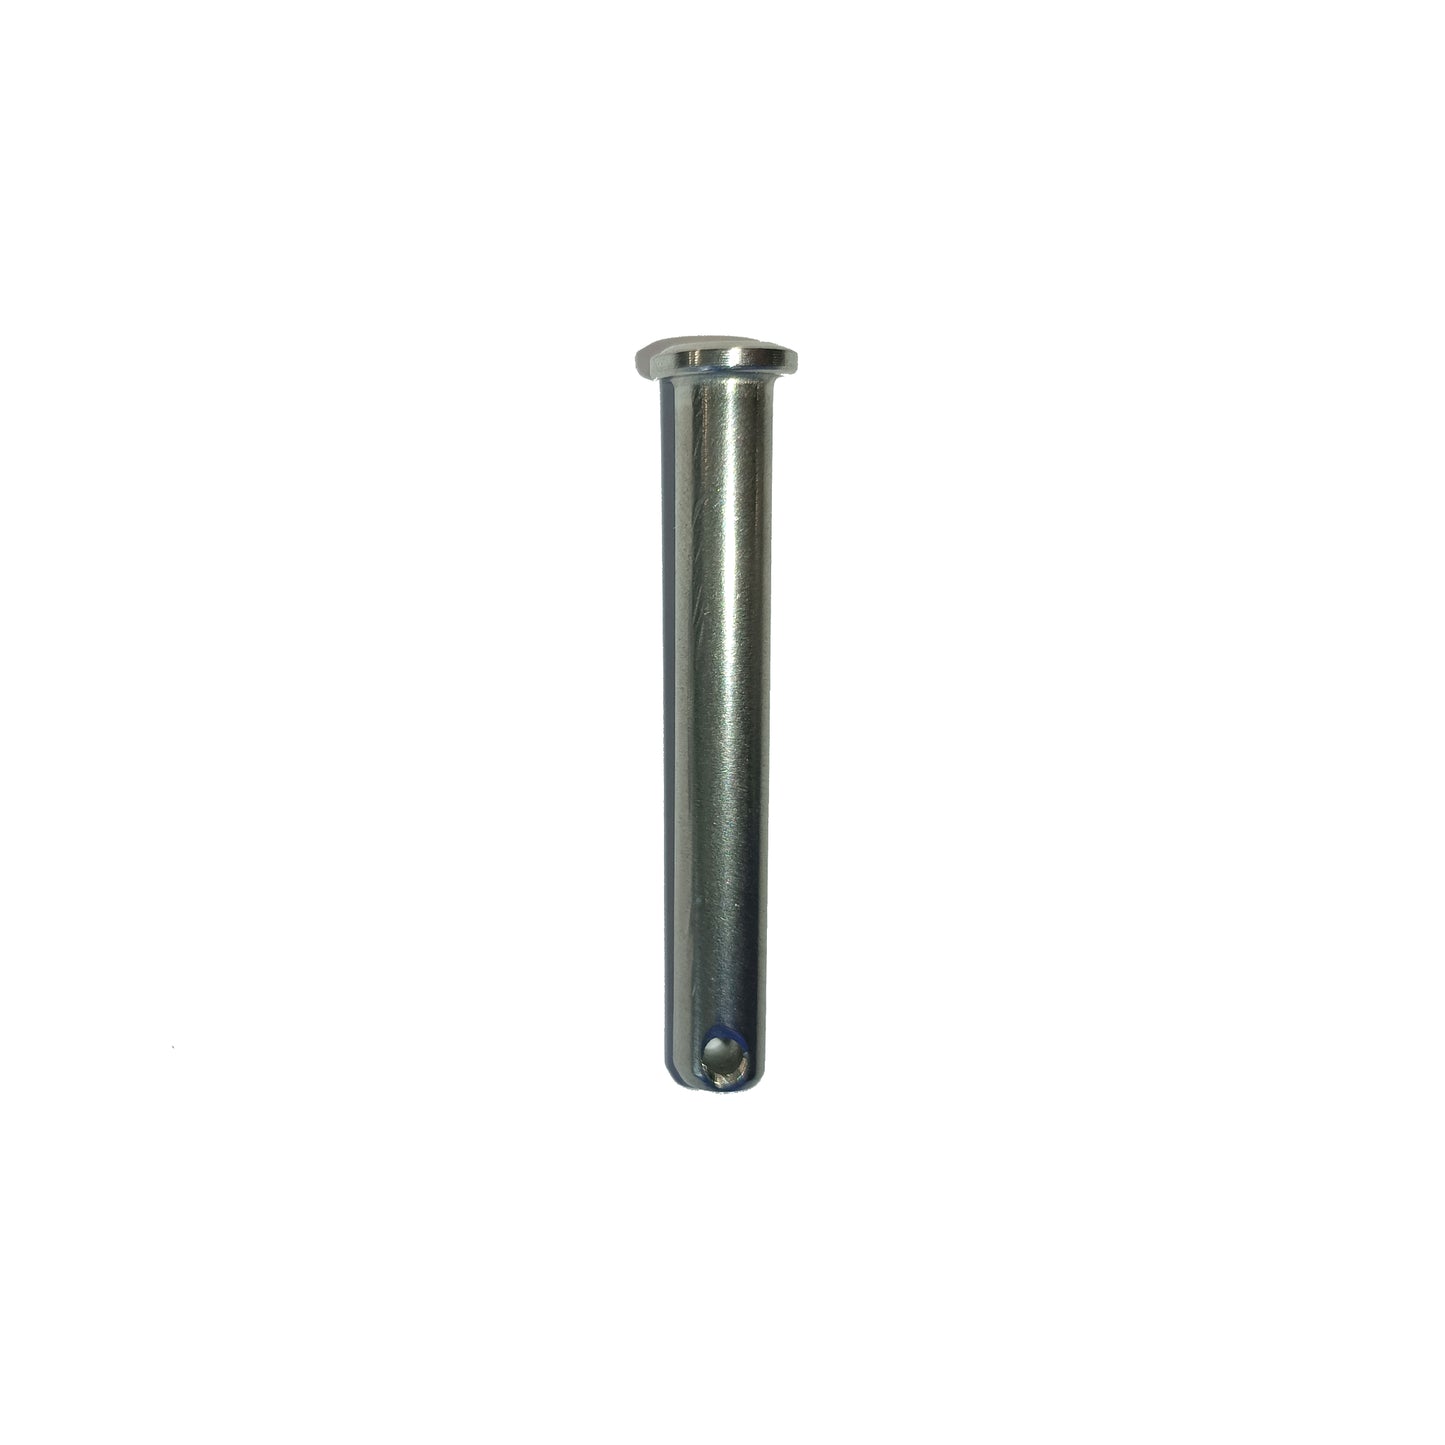 Safety pin for hitch 1.4401 6 x 41 mm